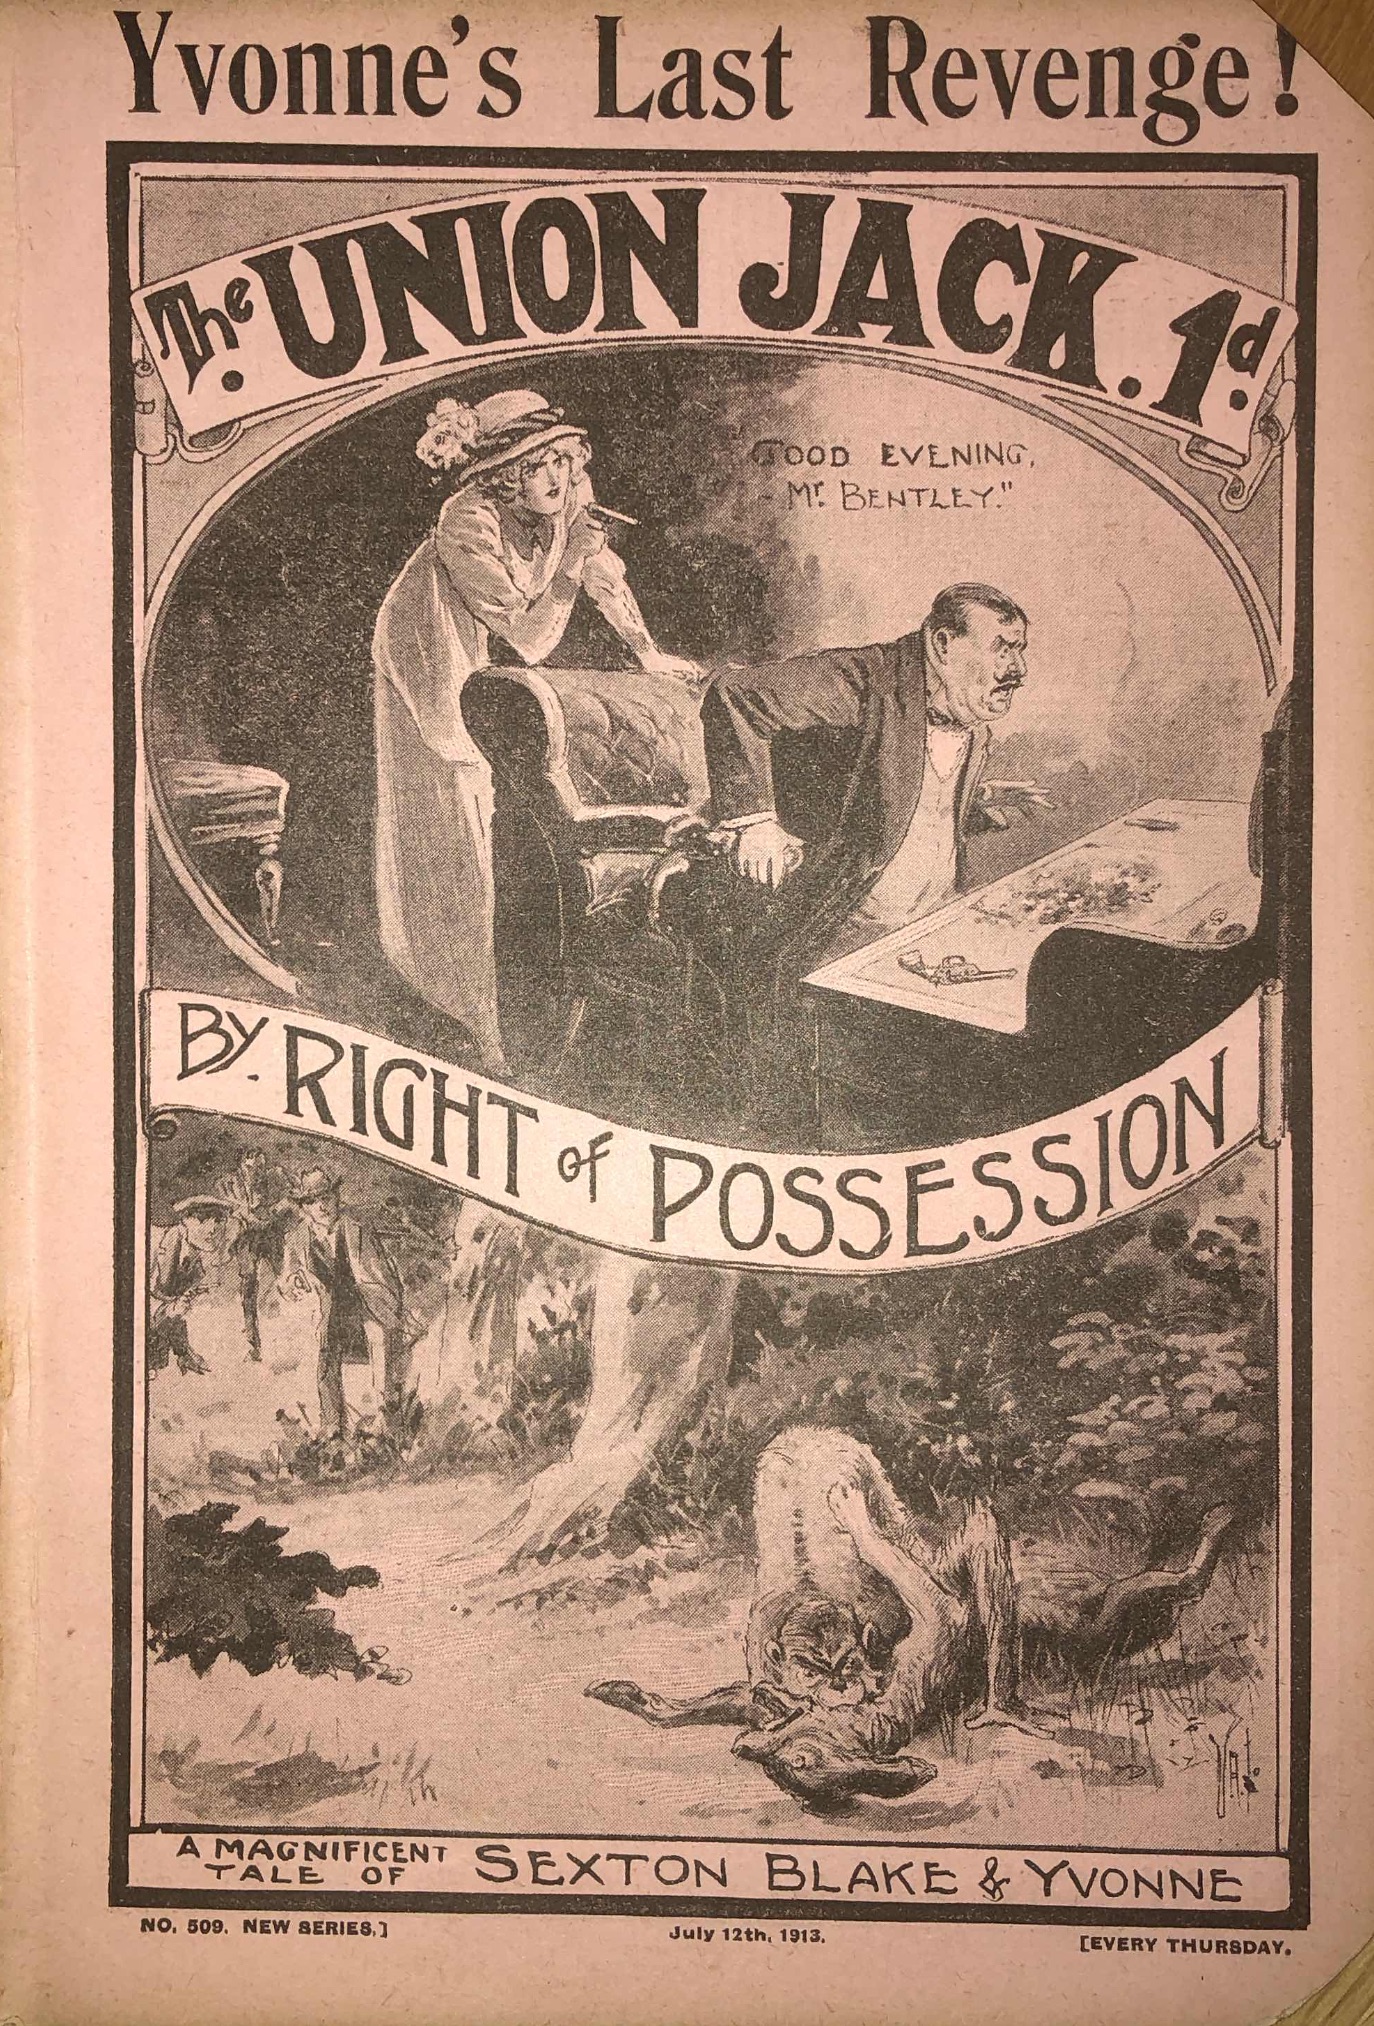 BY RIGHT OF POSSESSION